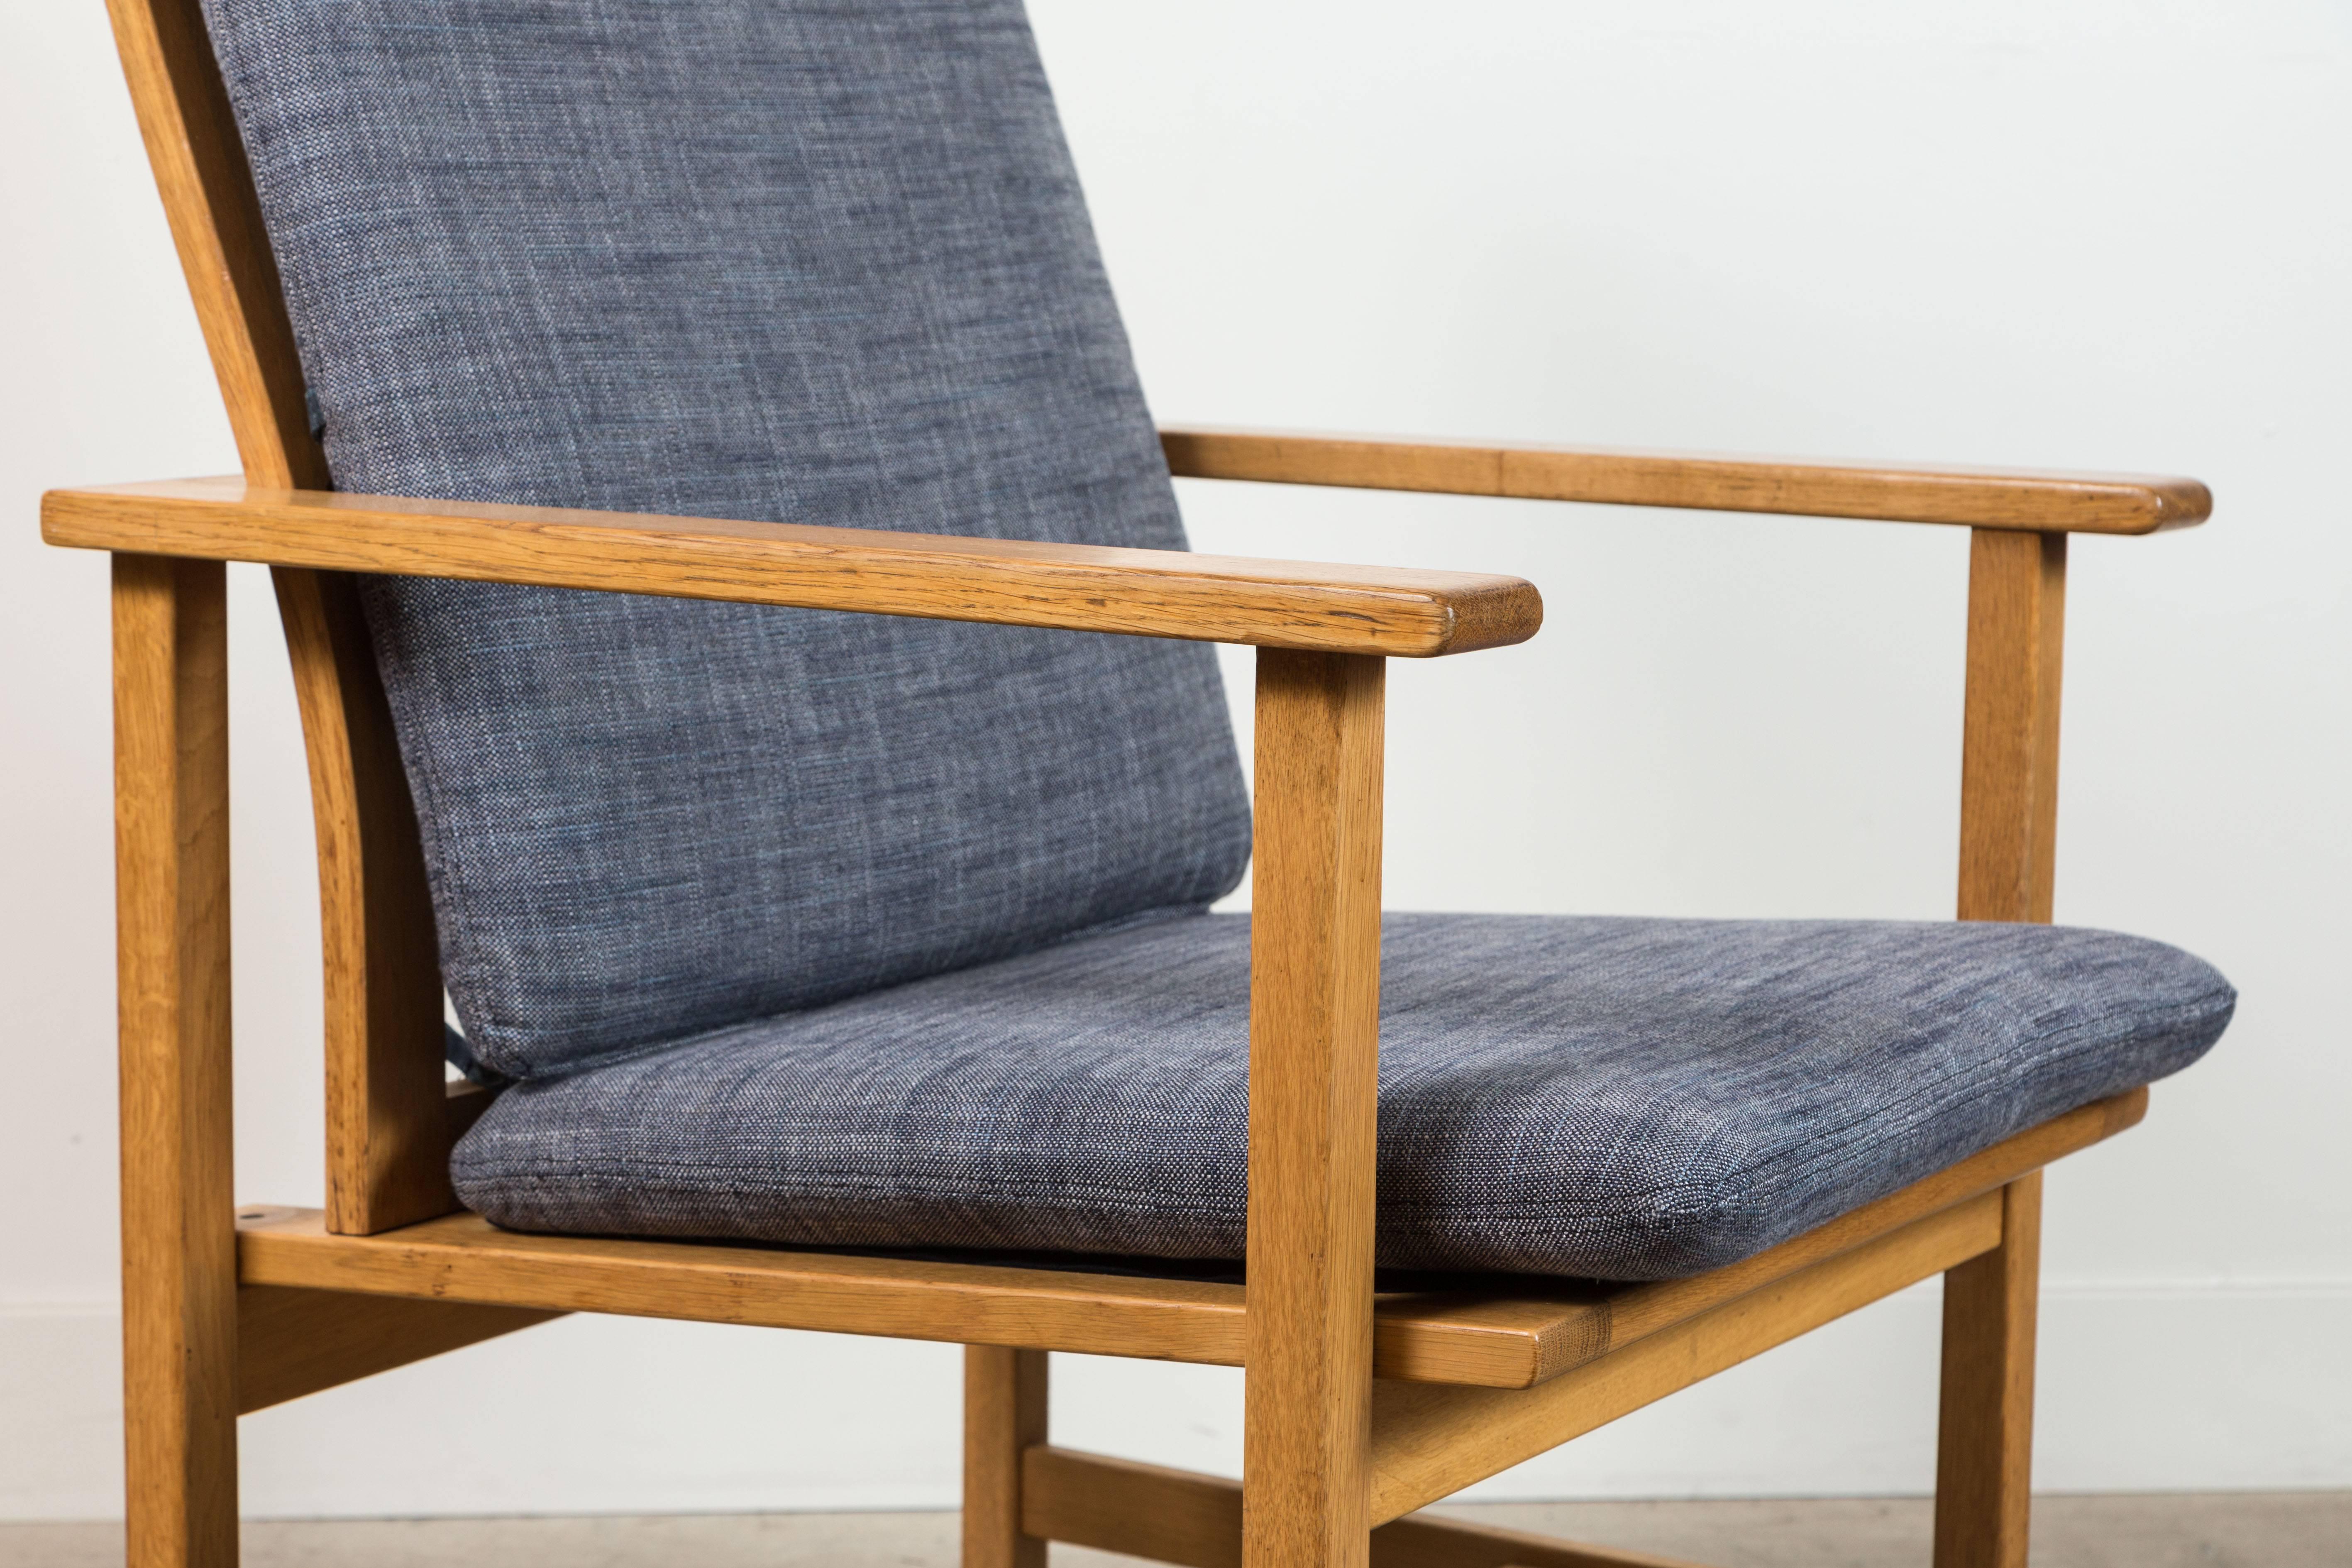 Single danish oak lounge chair by Børge Mogensen for Fredericia Stolefabrik. 
New upholstery. Completely restored.
Only one chair available.